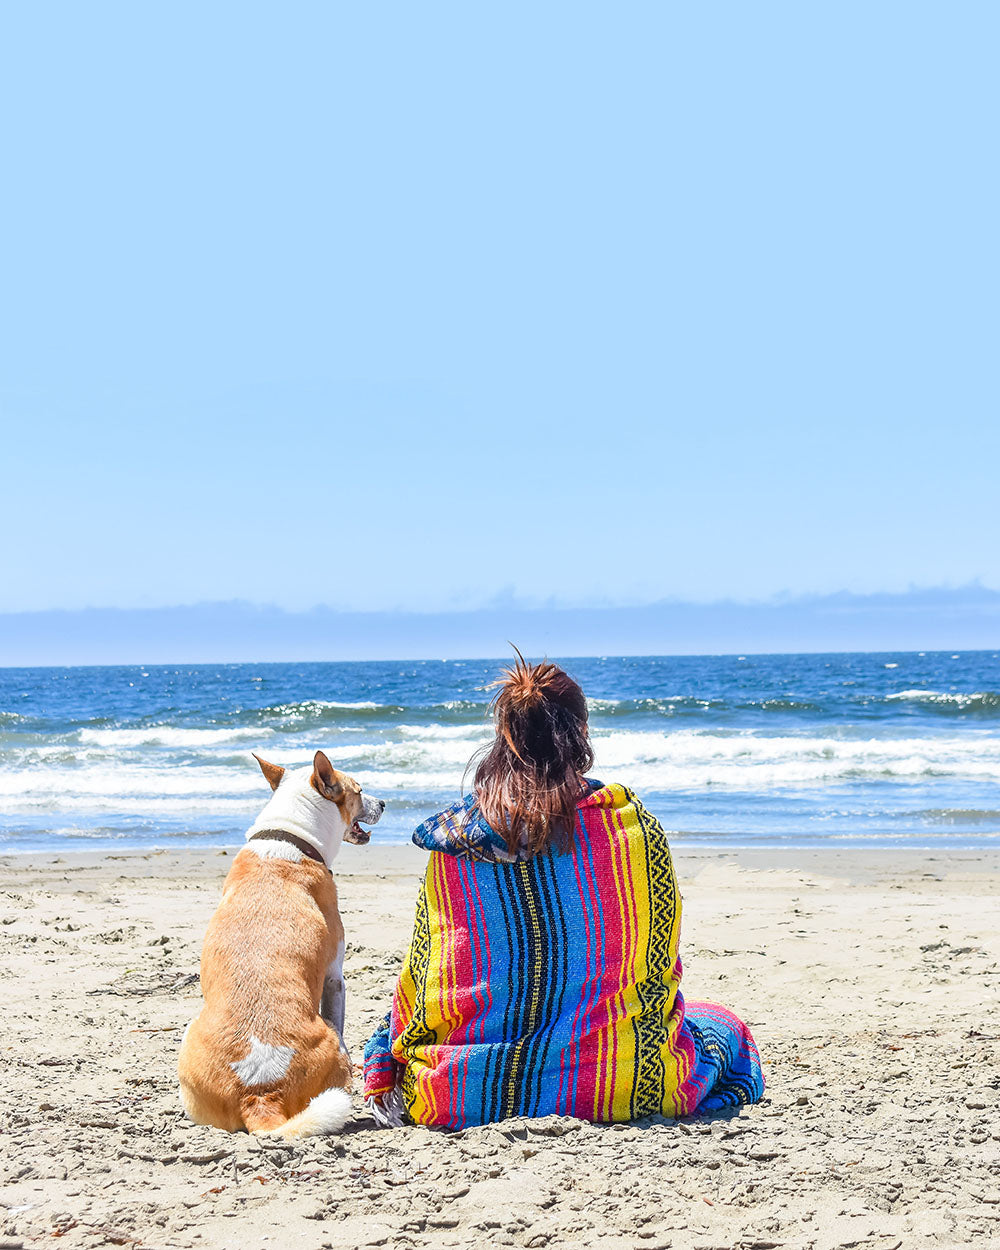 Relaxing at the beach with my best friend and my Sunshine Day Dream blanket. A cozy blanket that I can take anywhere my wanderlust spirit takes me.